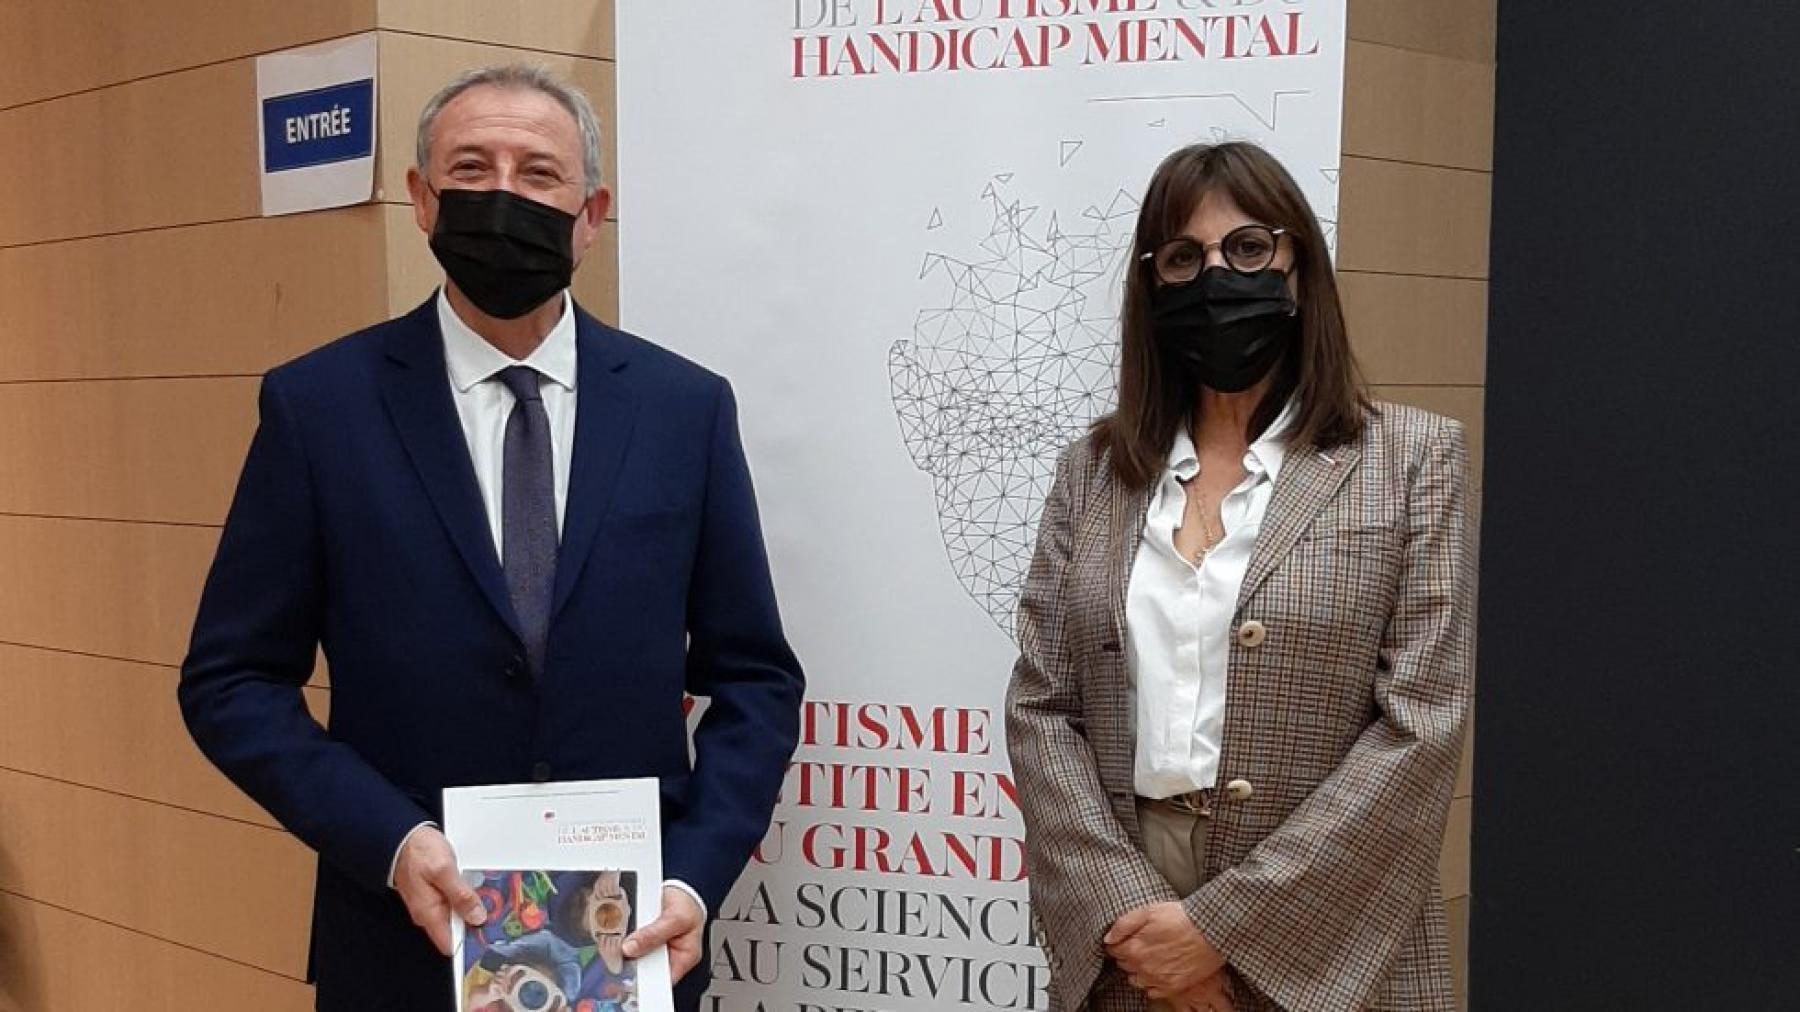 Monaco Conference on Autism and Mental Disability – third edition